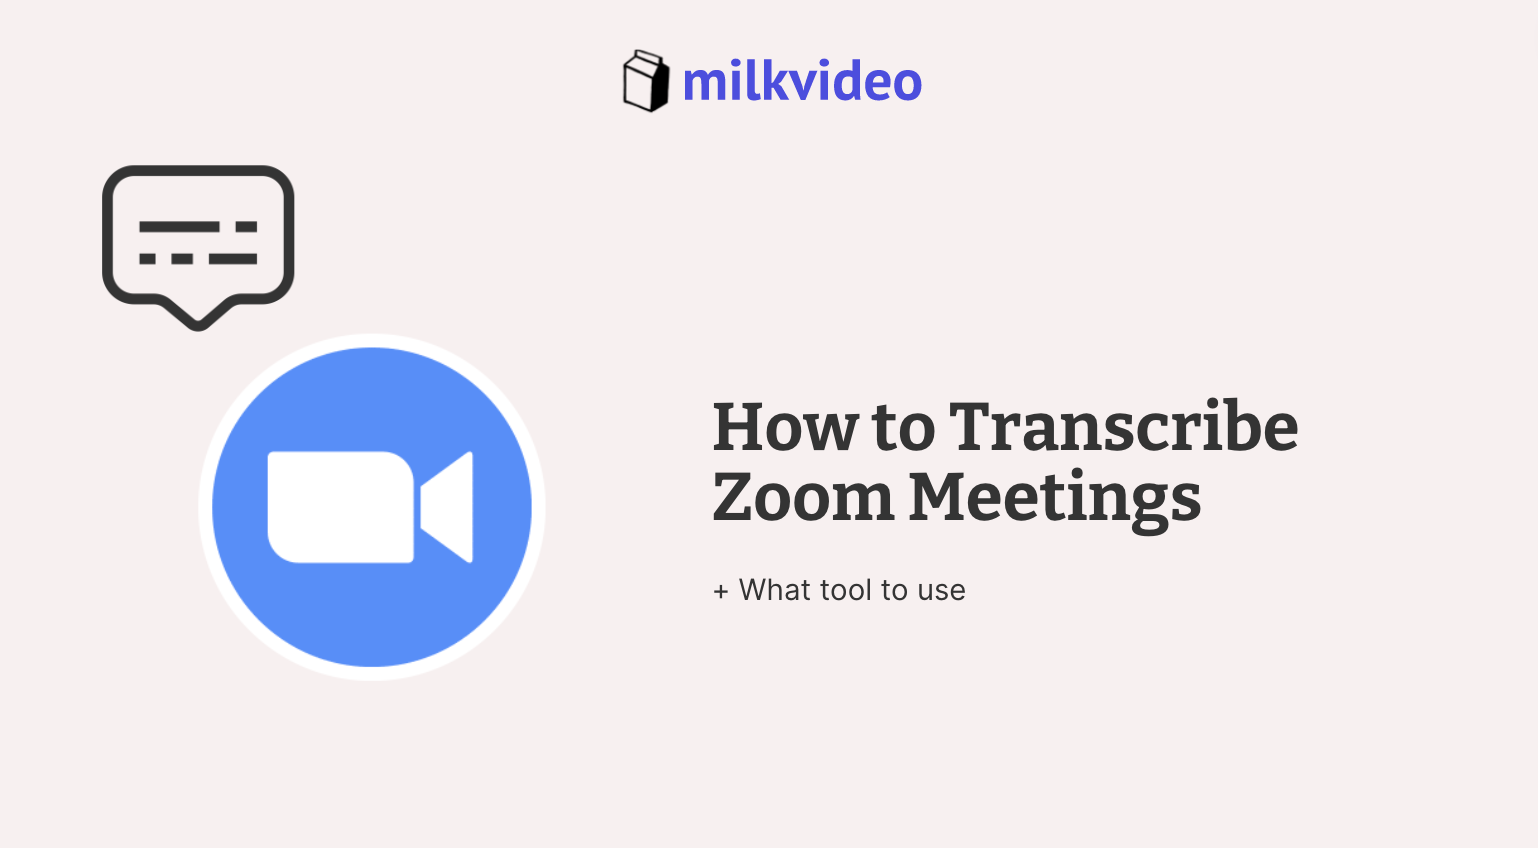 How to Transcribe Zoom Meetings